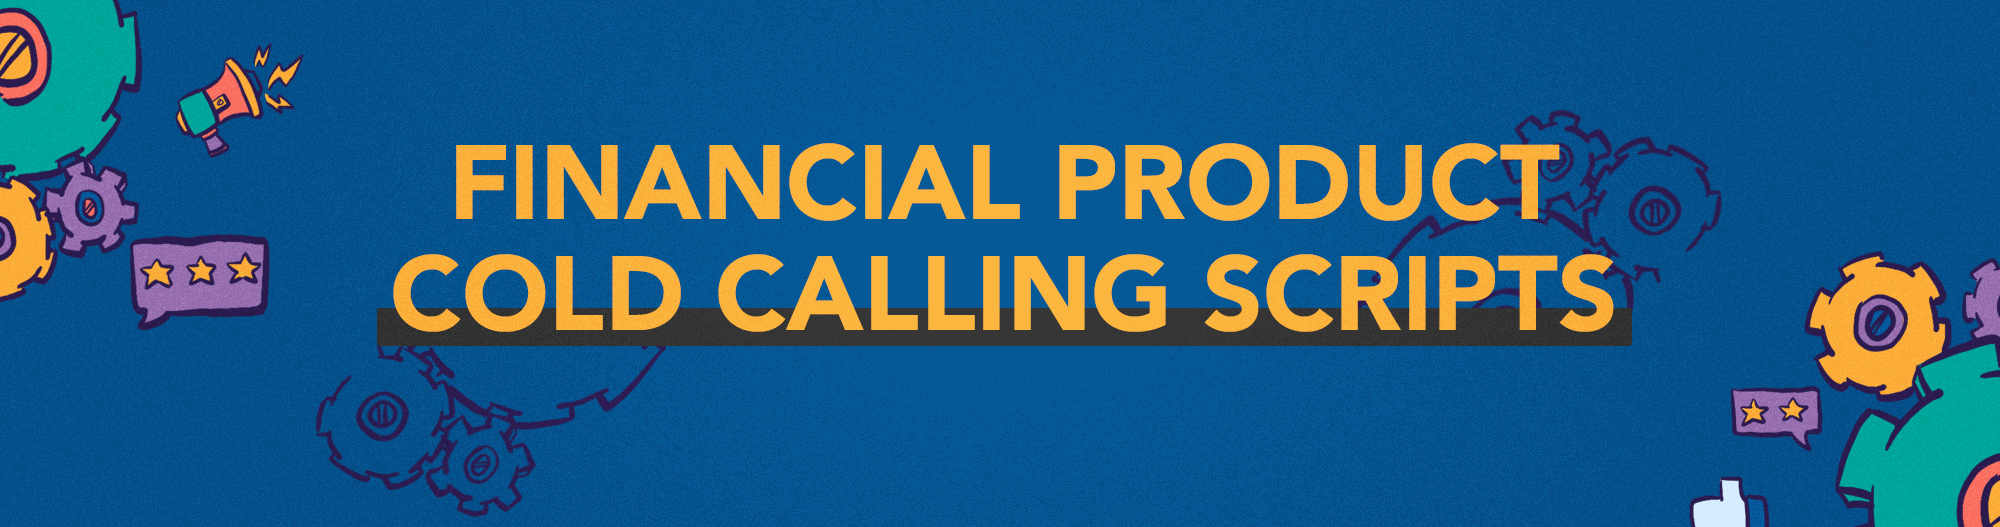 financial product cold calling tips